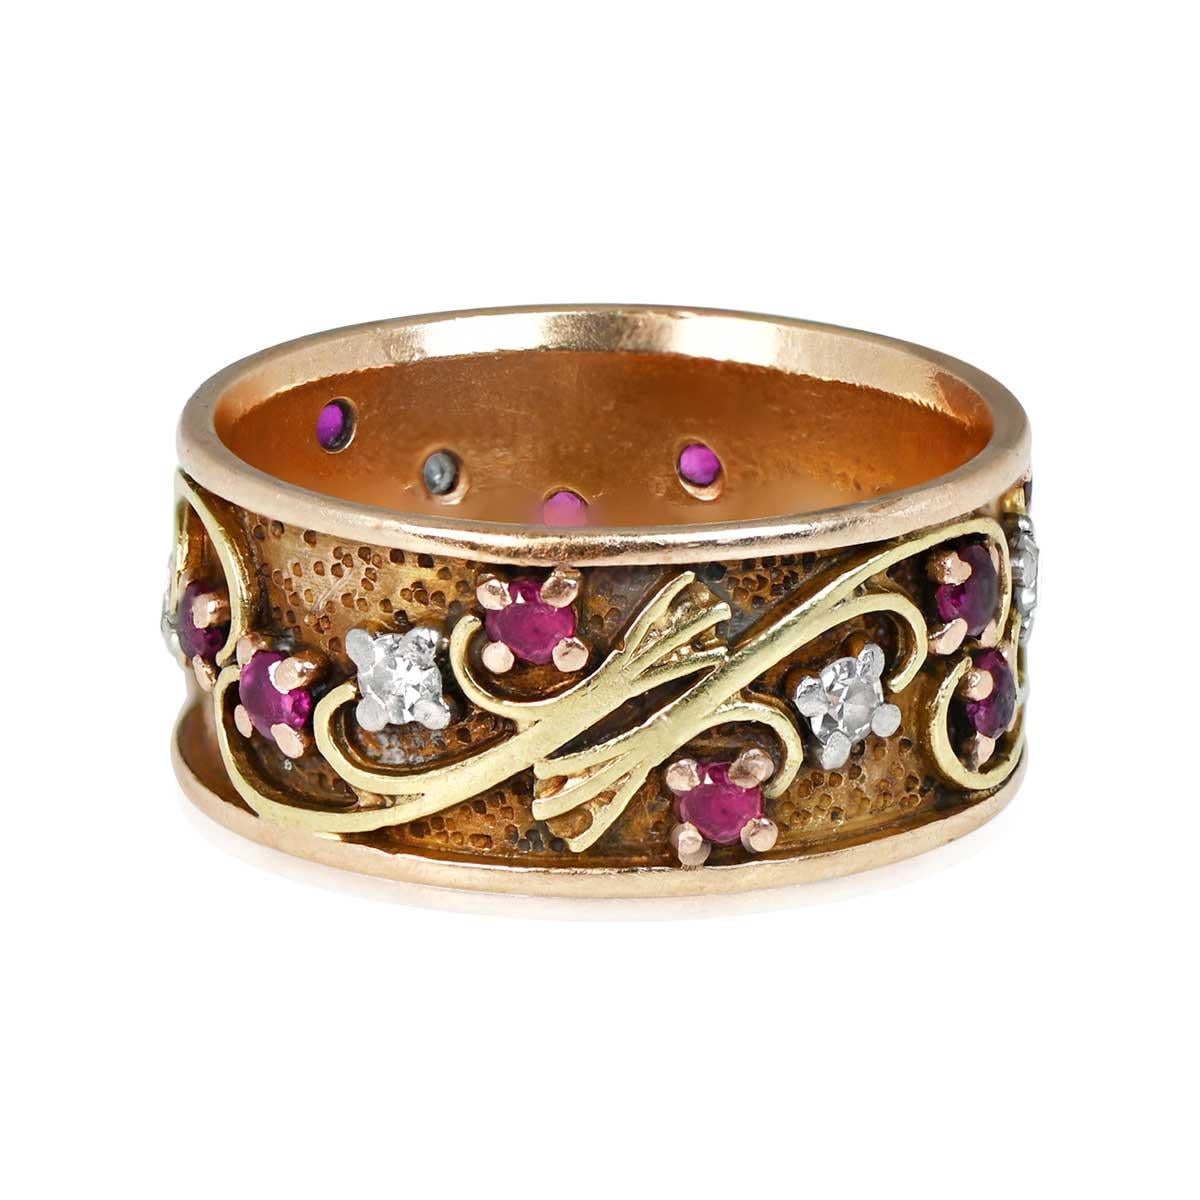 An exquisite antique wedding band from the Art Nouveau era, circa 1890. This timeless piece showcases a floral scroll-motif design adorned with round-cut natural rubies and single-cut diamonds. The stones beautifully contrast against a mottled